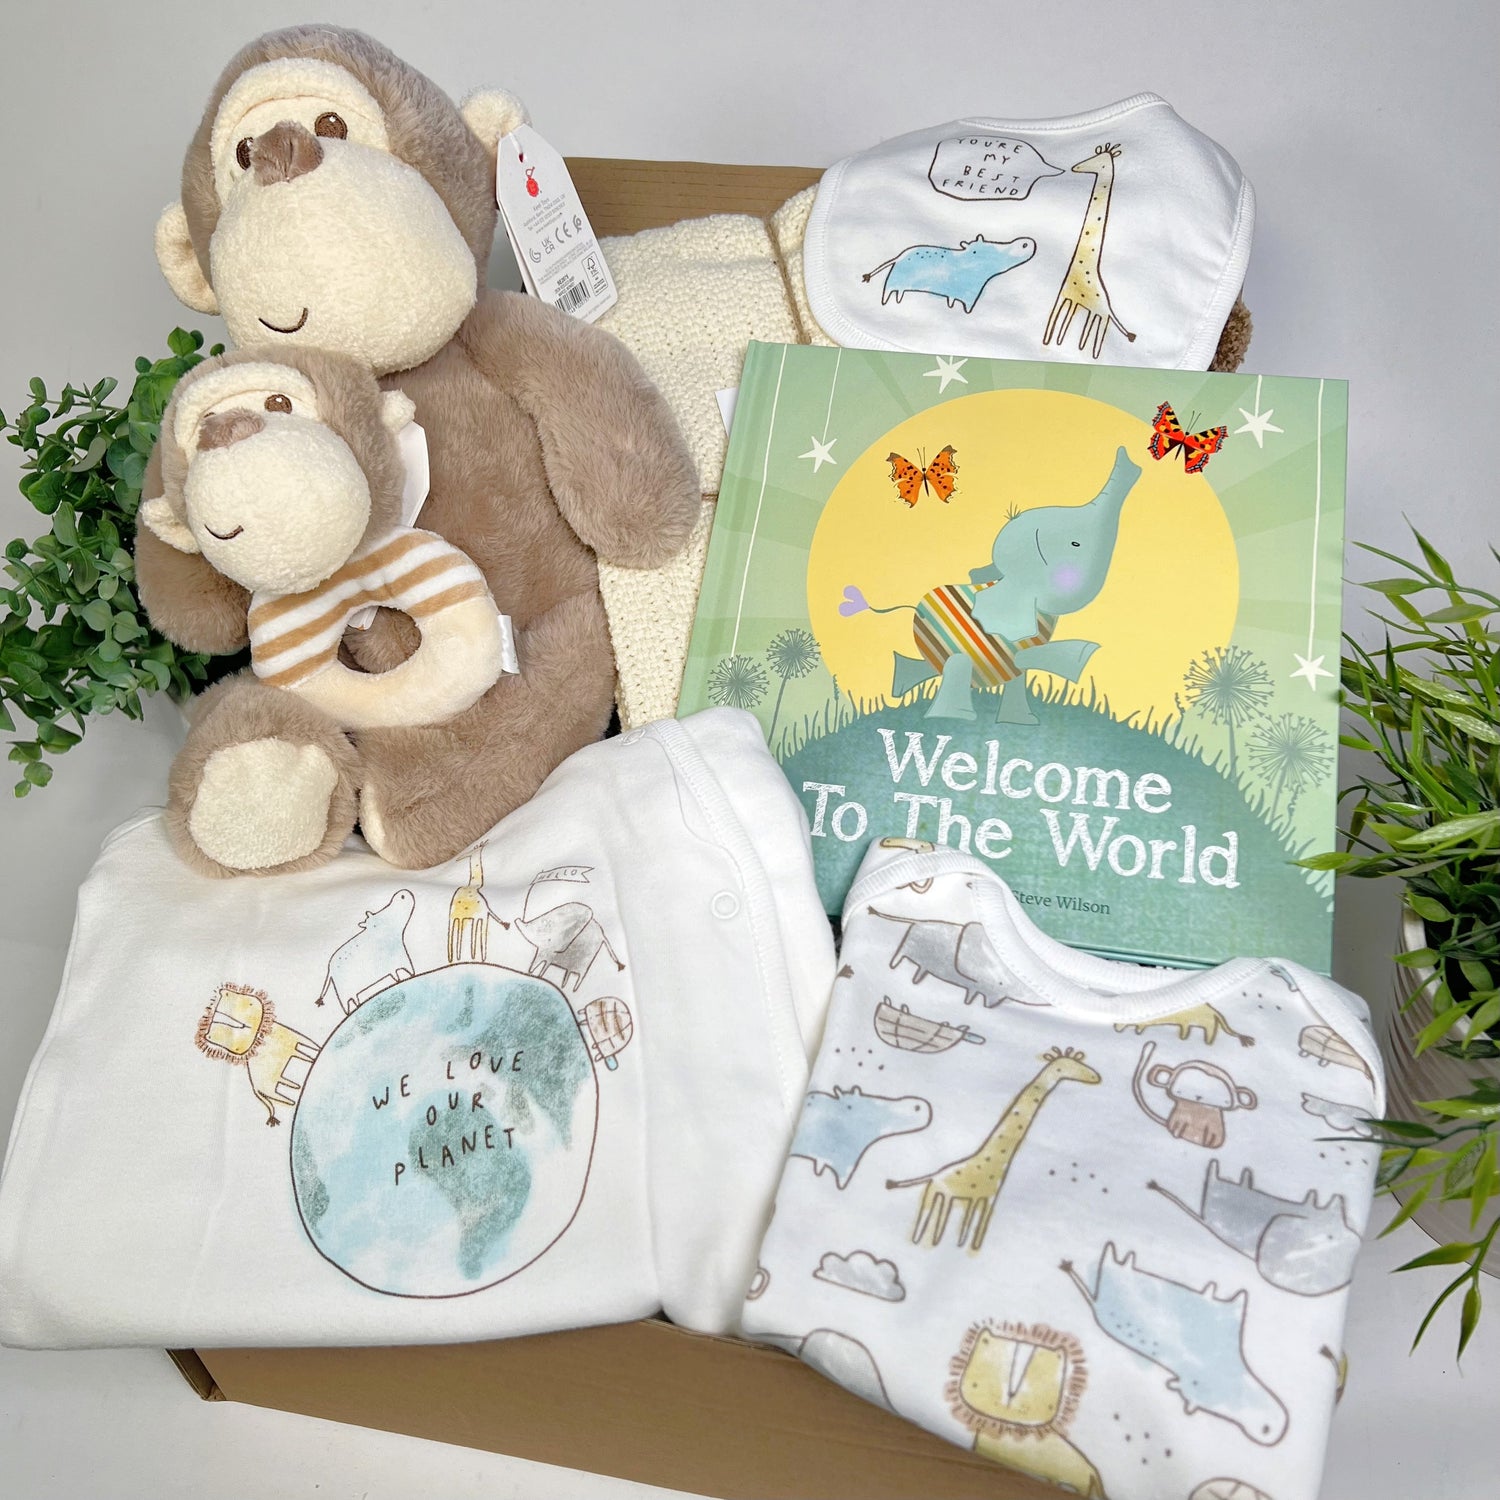 Planet friendly new baby hamper with a Keeleco Marley monkey soft toy and matching baby rattel , a Hippychick almond cellular baby blanket, a "Welcome to the world" hardback reading book and a three piece organic cotton baby clothing set to include a sleepsuit, bib and body suit with the wording "We love our planet"